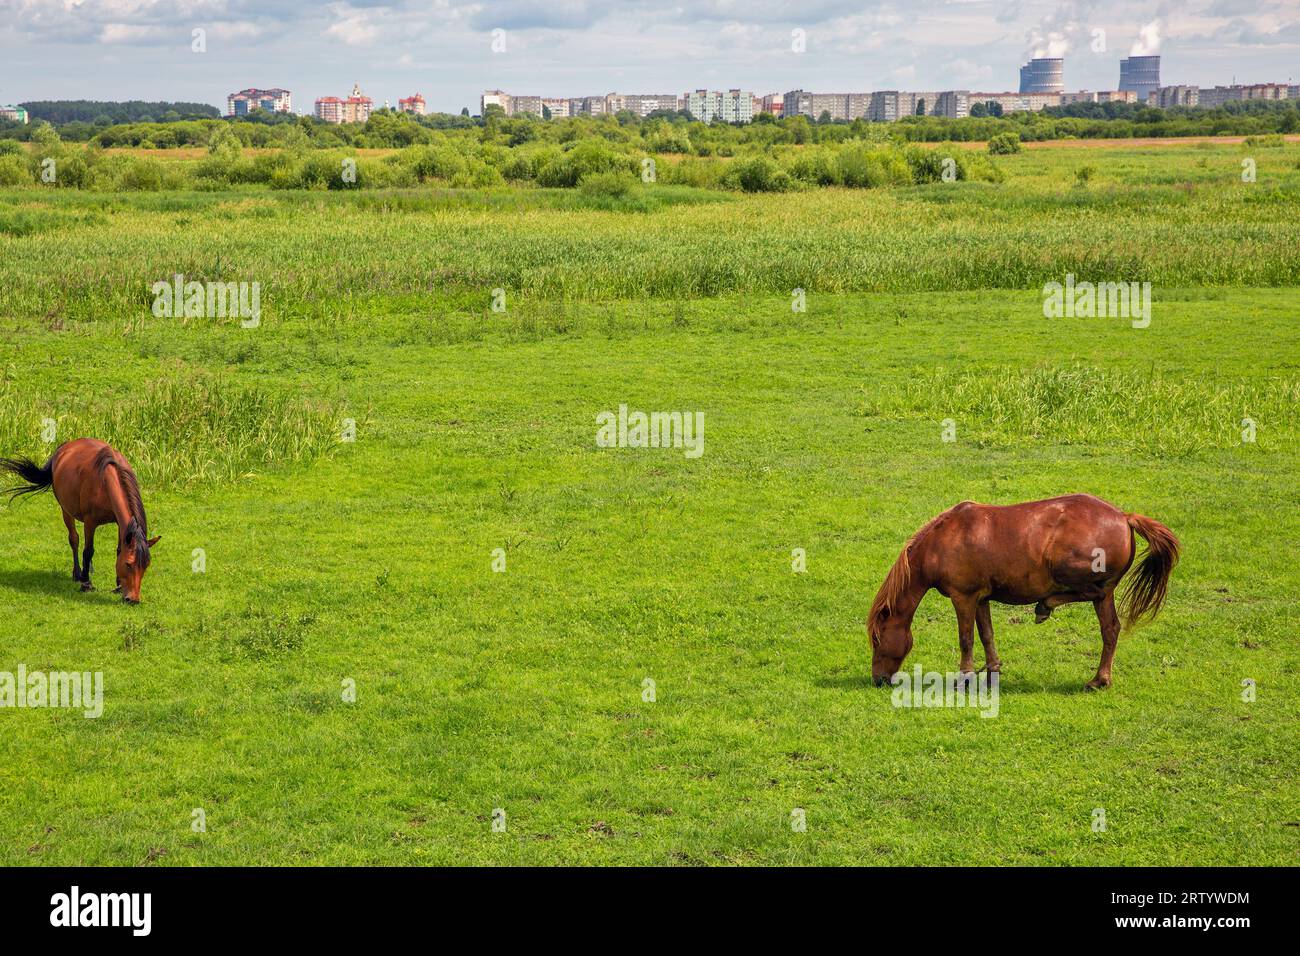 Herd of brown horses grazing in the meadow closeup. Nuclear power plant in the background. Stock Photo